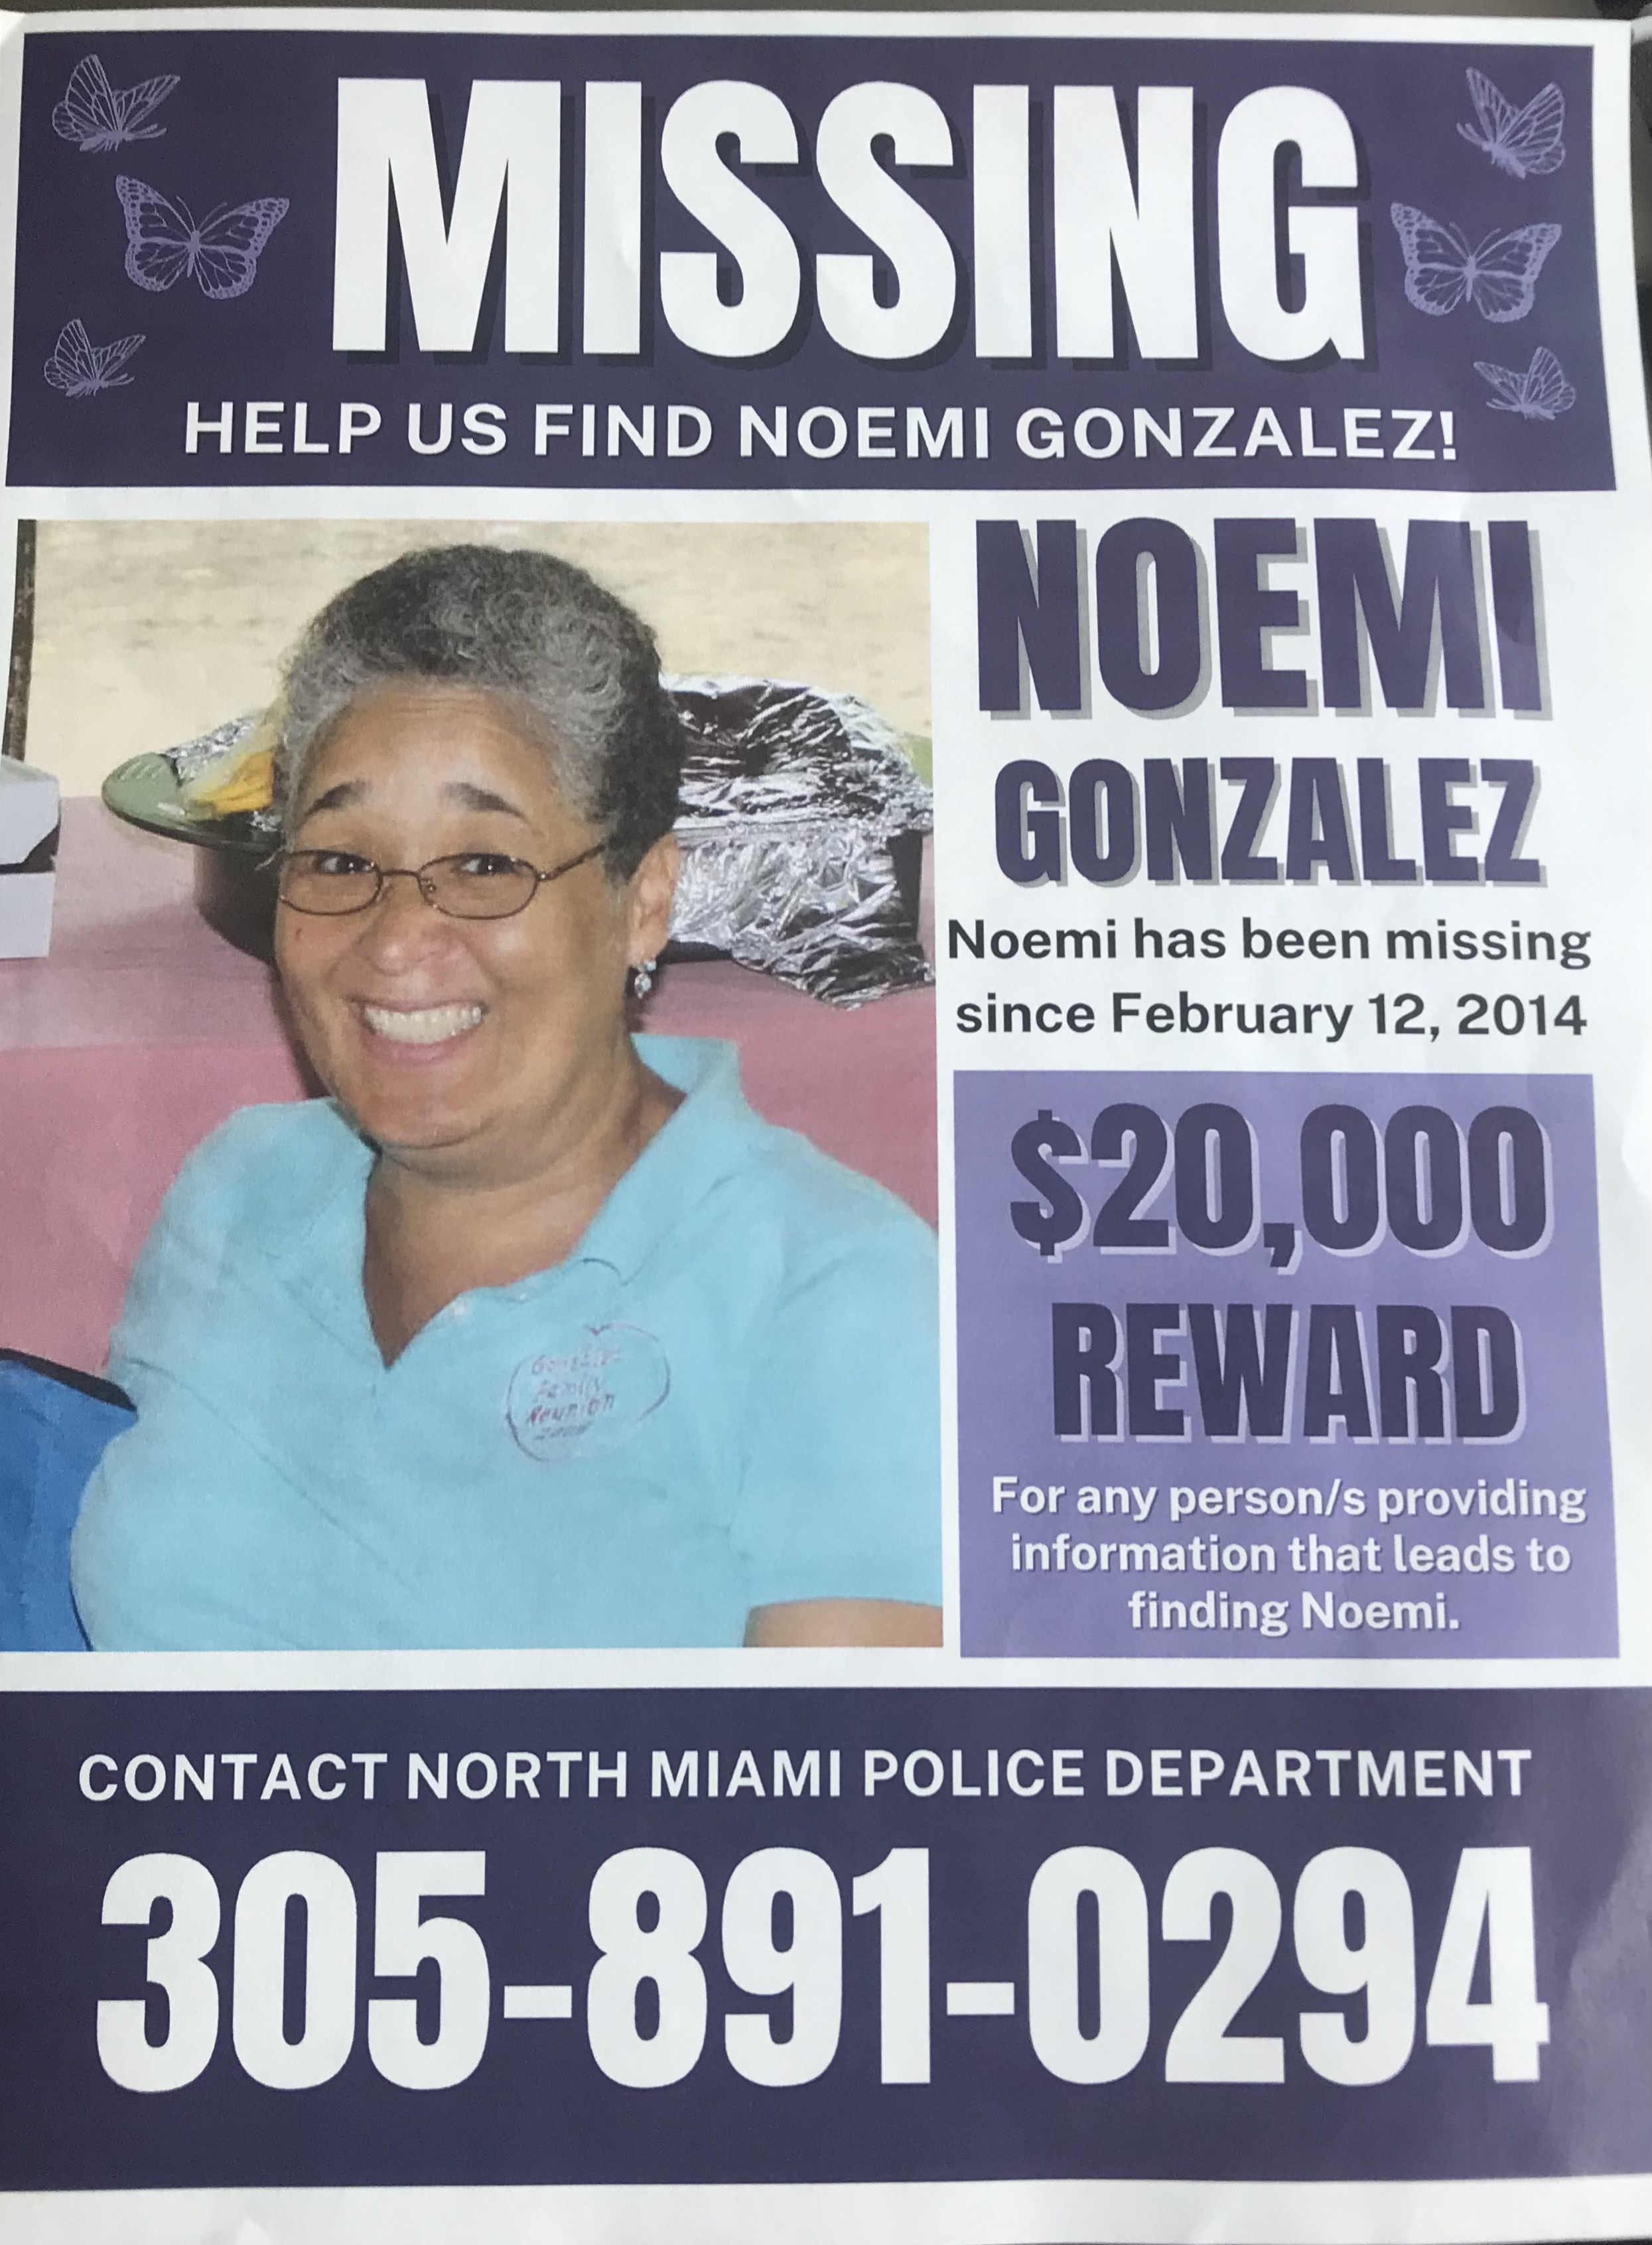 8 Years After Disappearance, Family of Missing North Miami Woman Noemi Gonzalez Desperate For New Leads